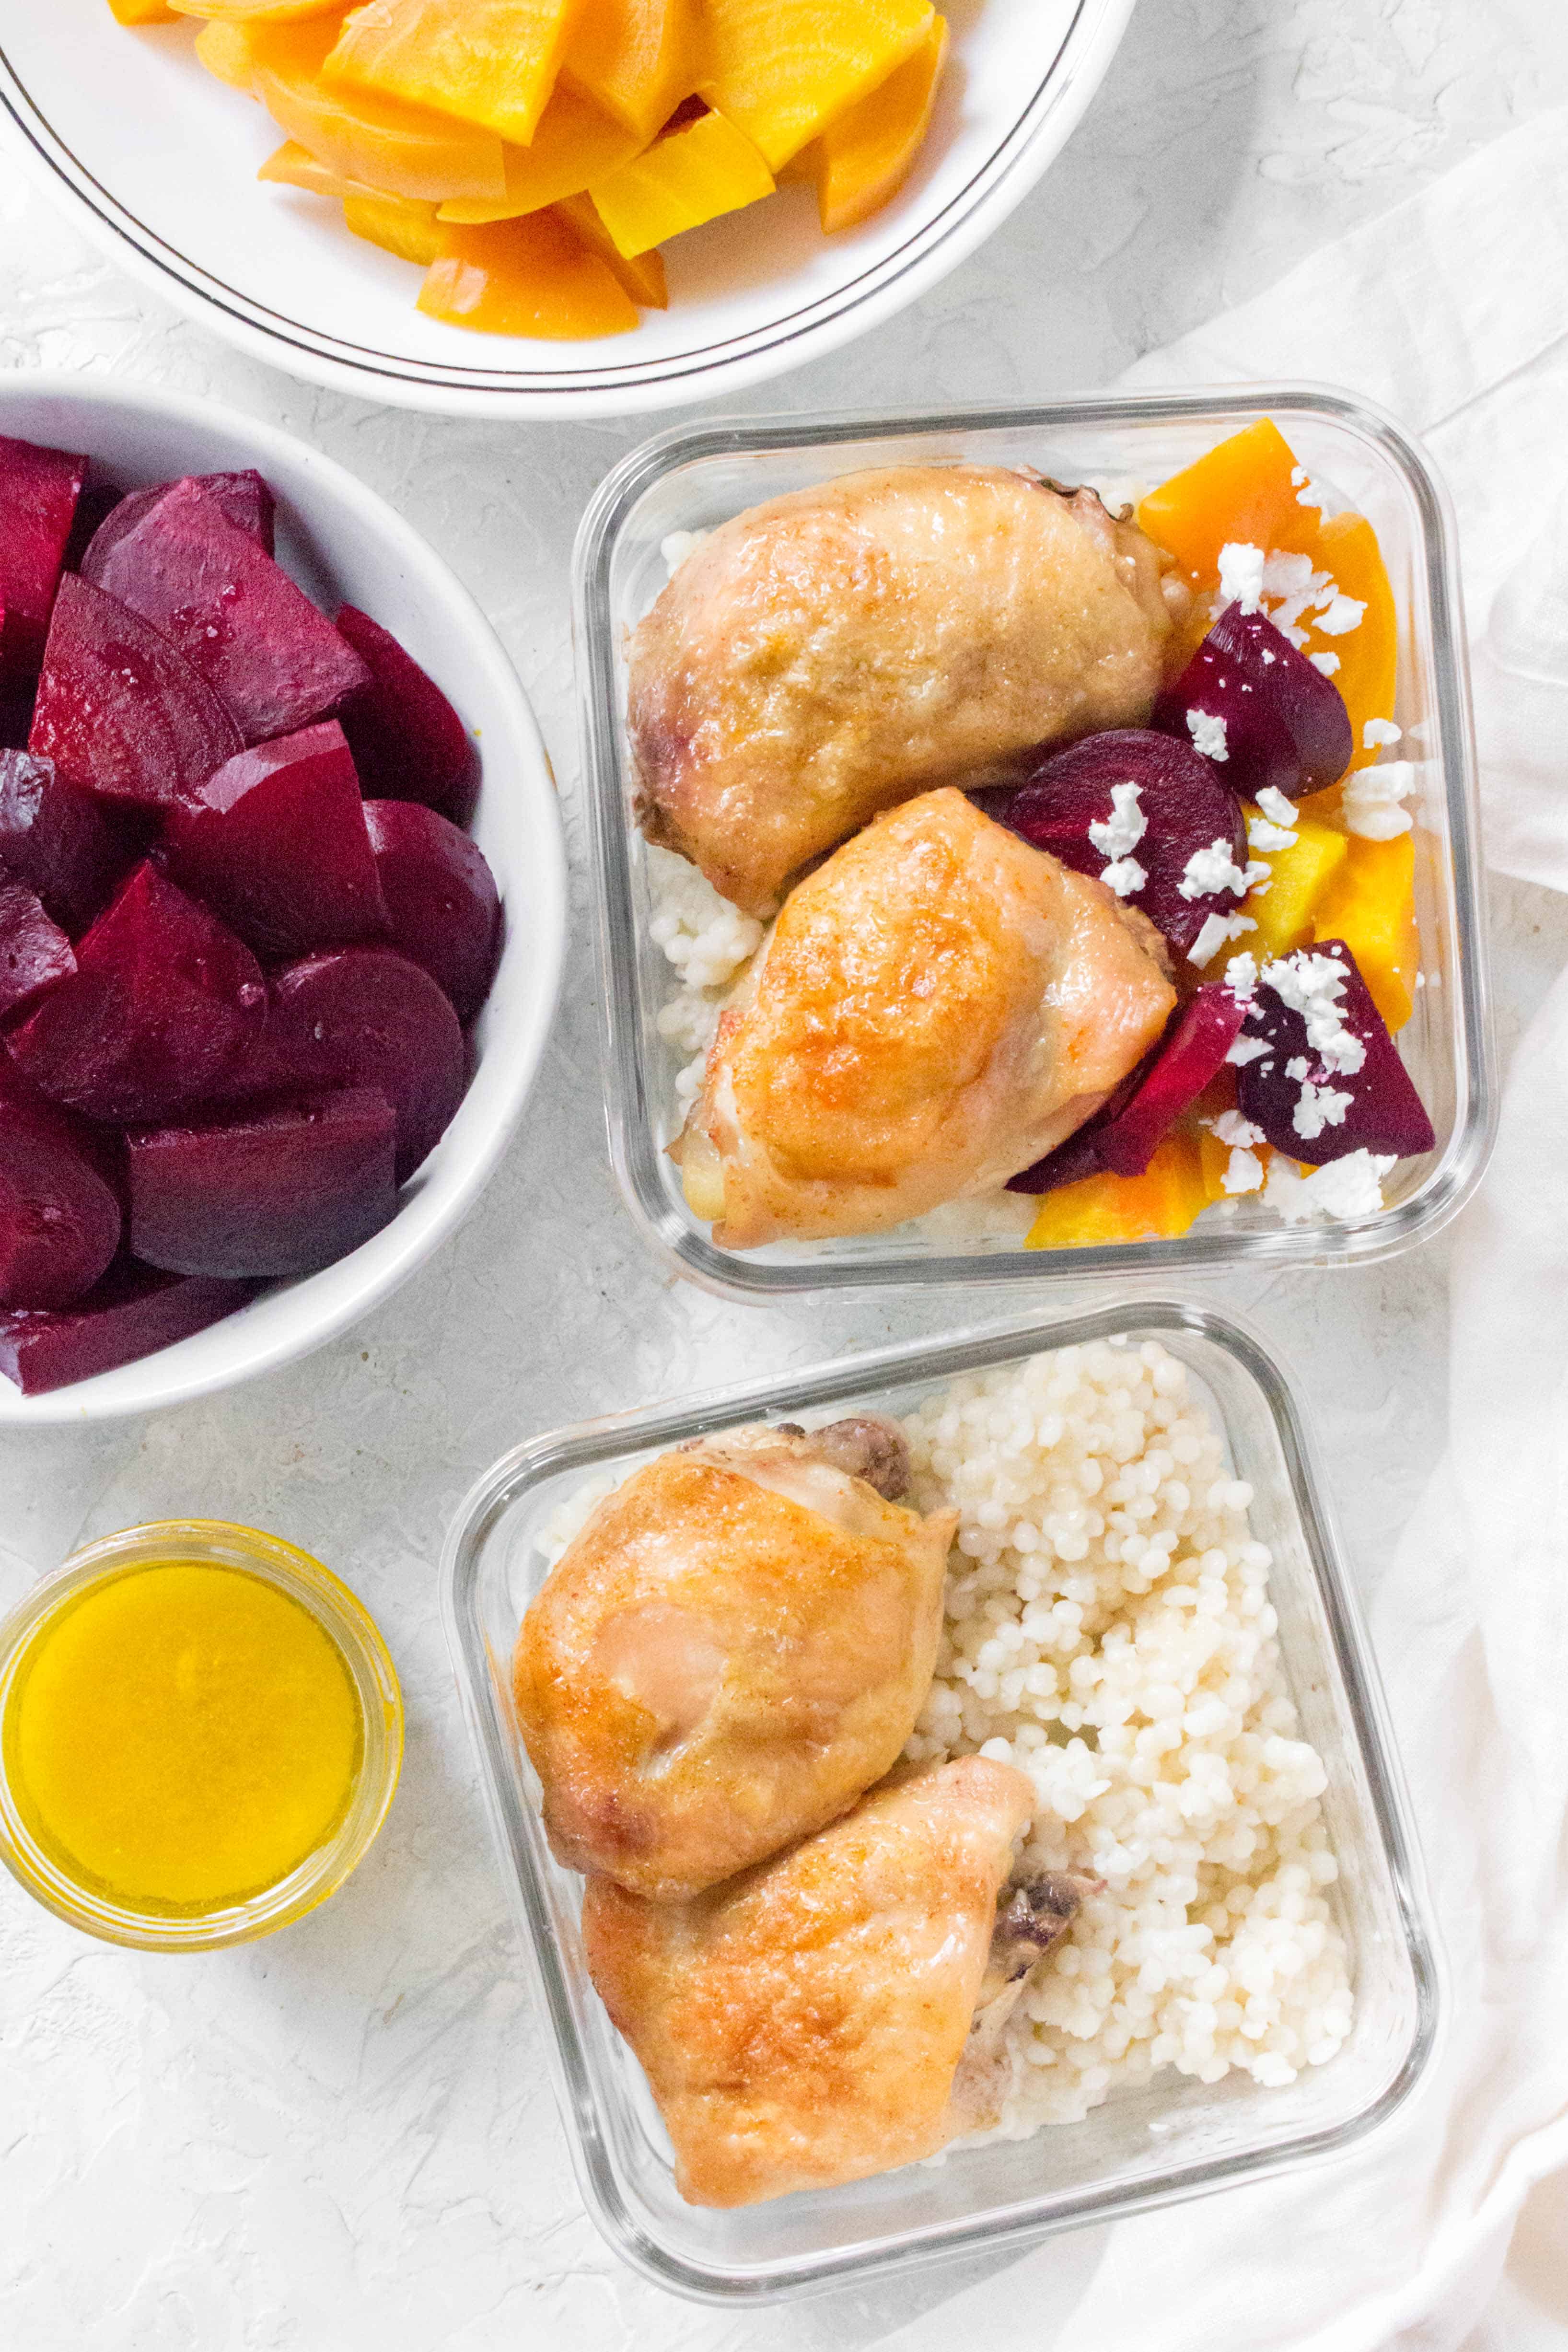 This Couscous, Beets, and Chicken Meal Prep is filling, healthy, and delicious! Make them ahead for four delicious lunches.